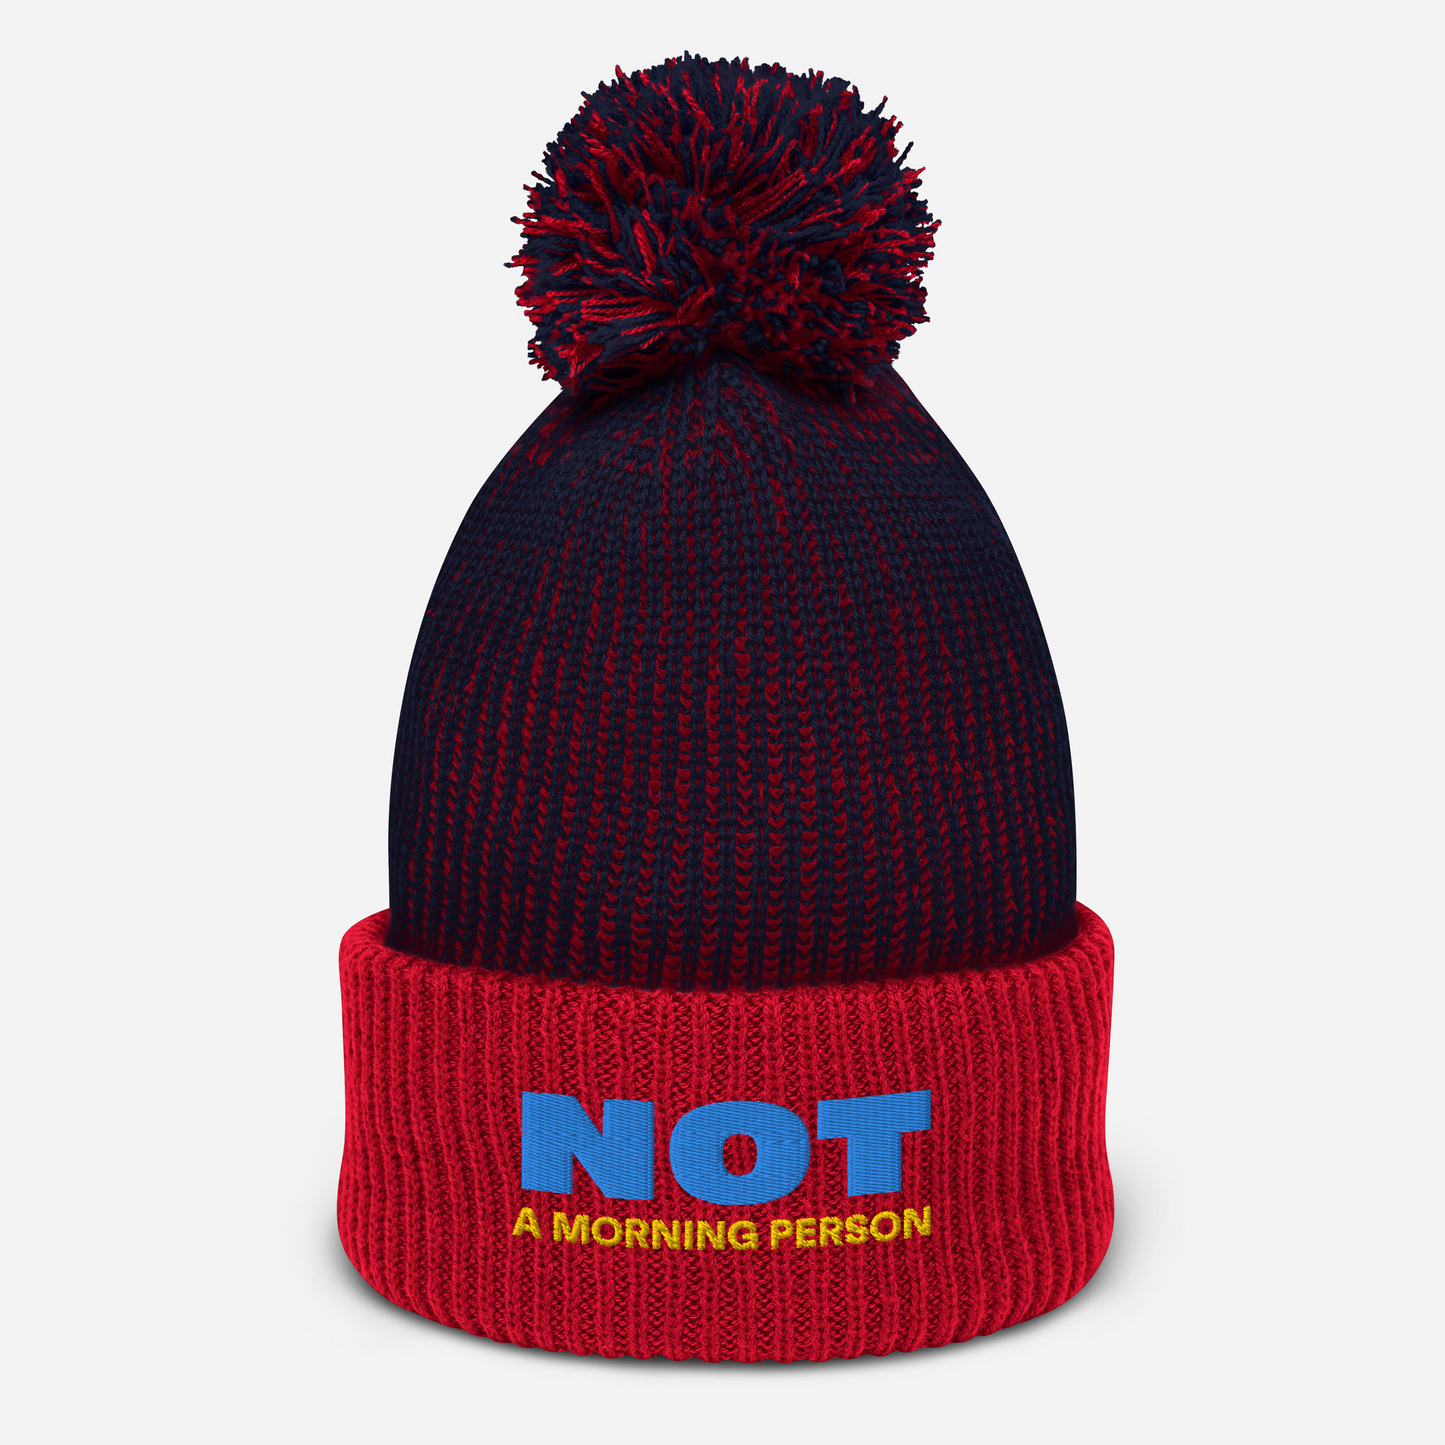 Unisex Pom-Pom Beanie. with "Not a morning person" statement